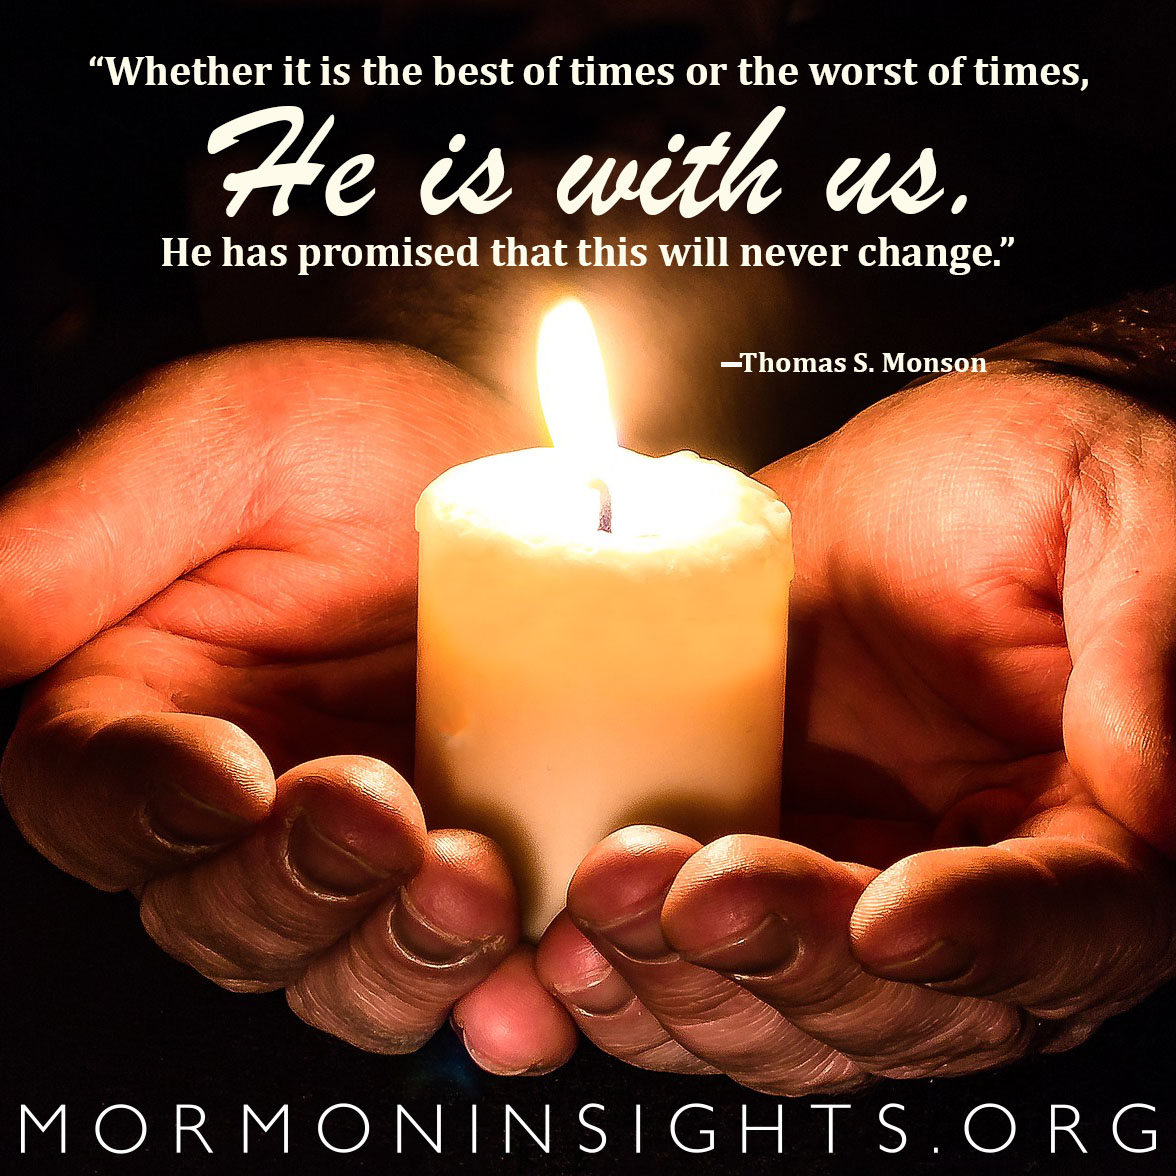 “Whether it is the best of times or the worst of times, He is with us. He has promised that this will never change.” —Thomas S. Monson